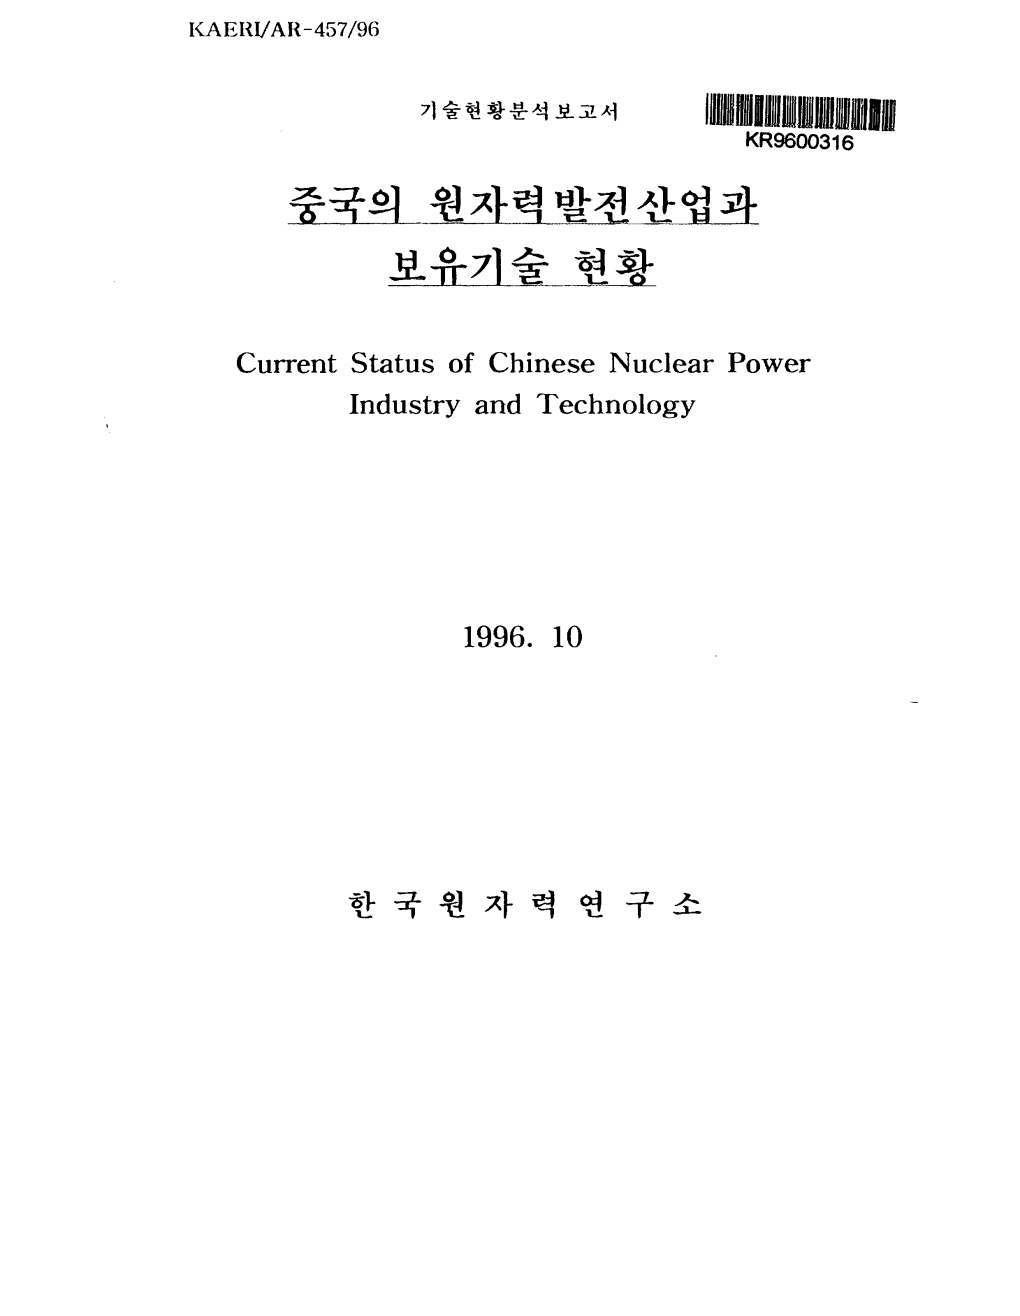 Current Status of Chinese Nuclear Power Industry and Technology